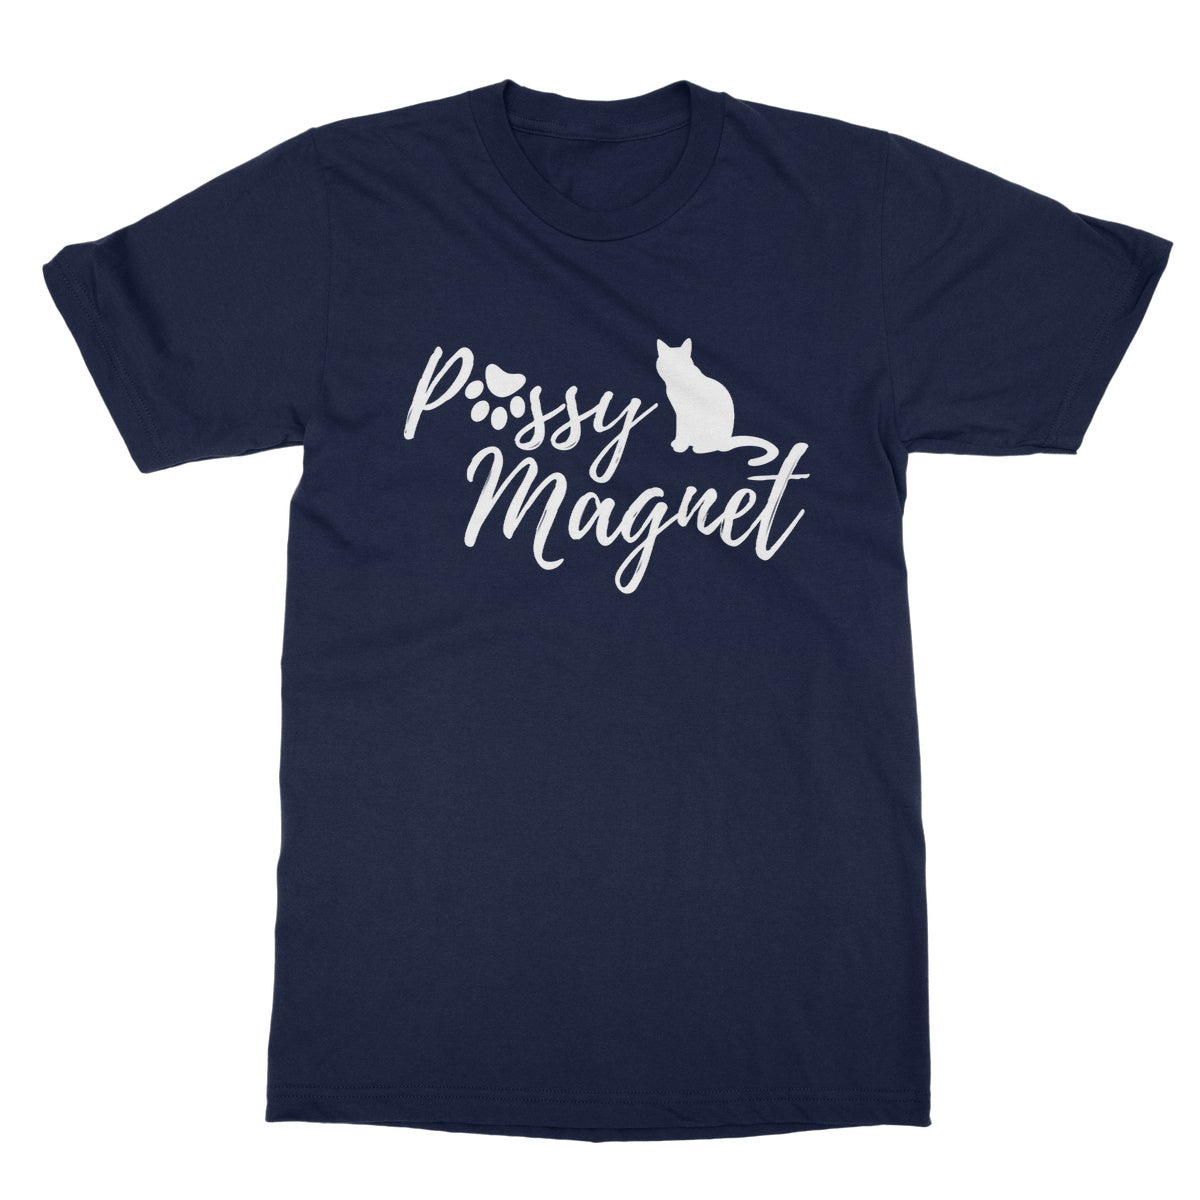 pussy magnet t shirt navy